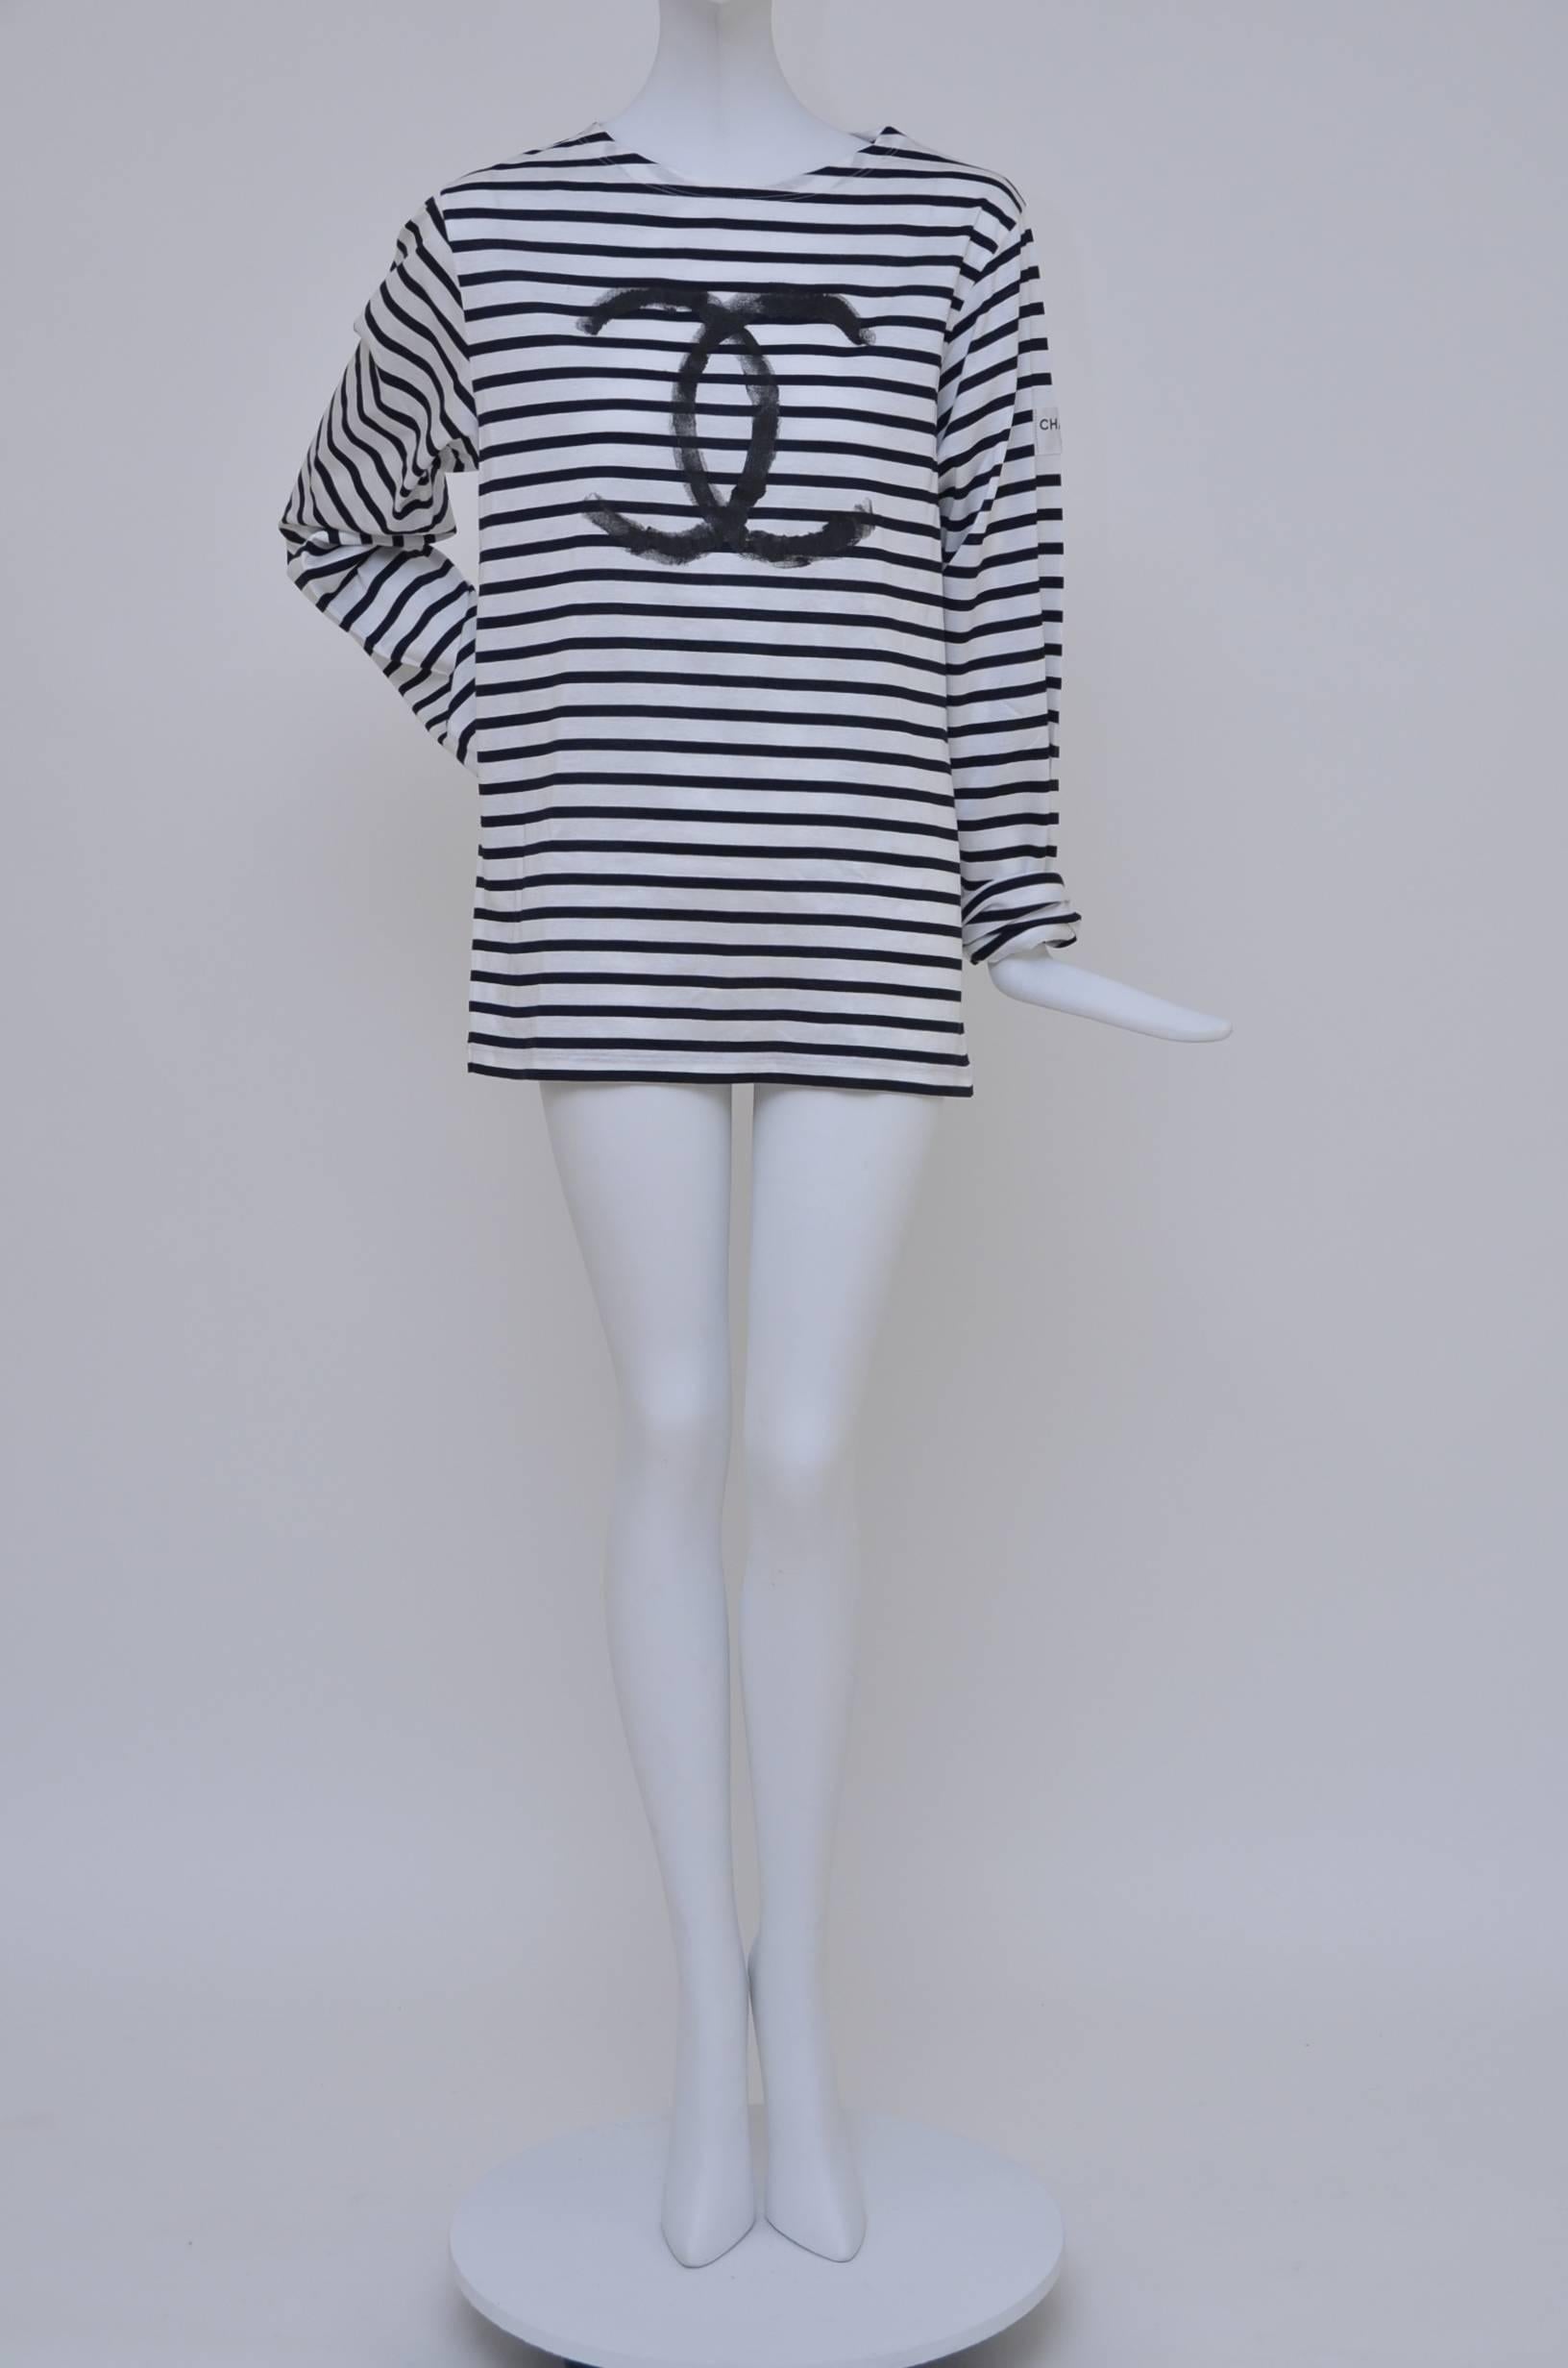 Women's CHANEL Christmas 2008 Shirt Limited As Seen On Mira Duma NEW Size S